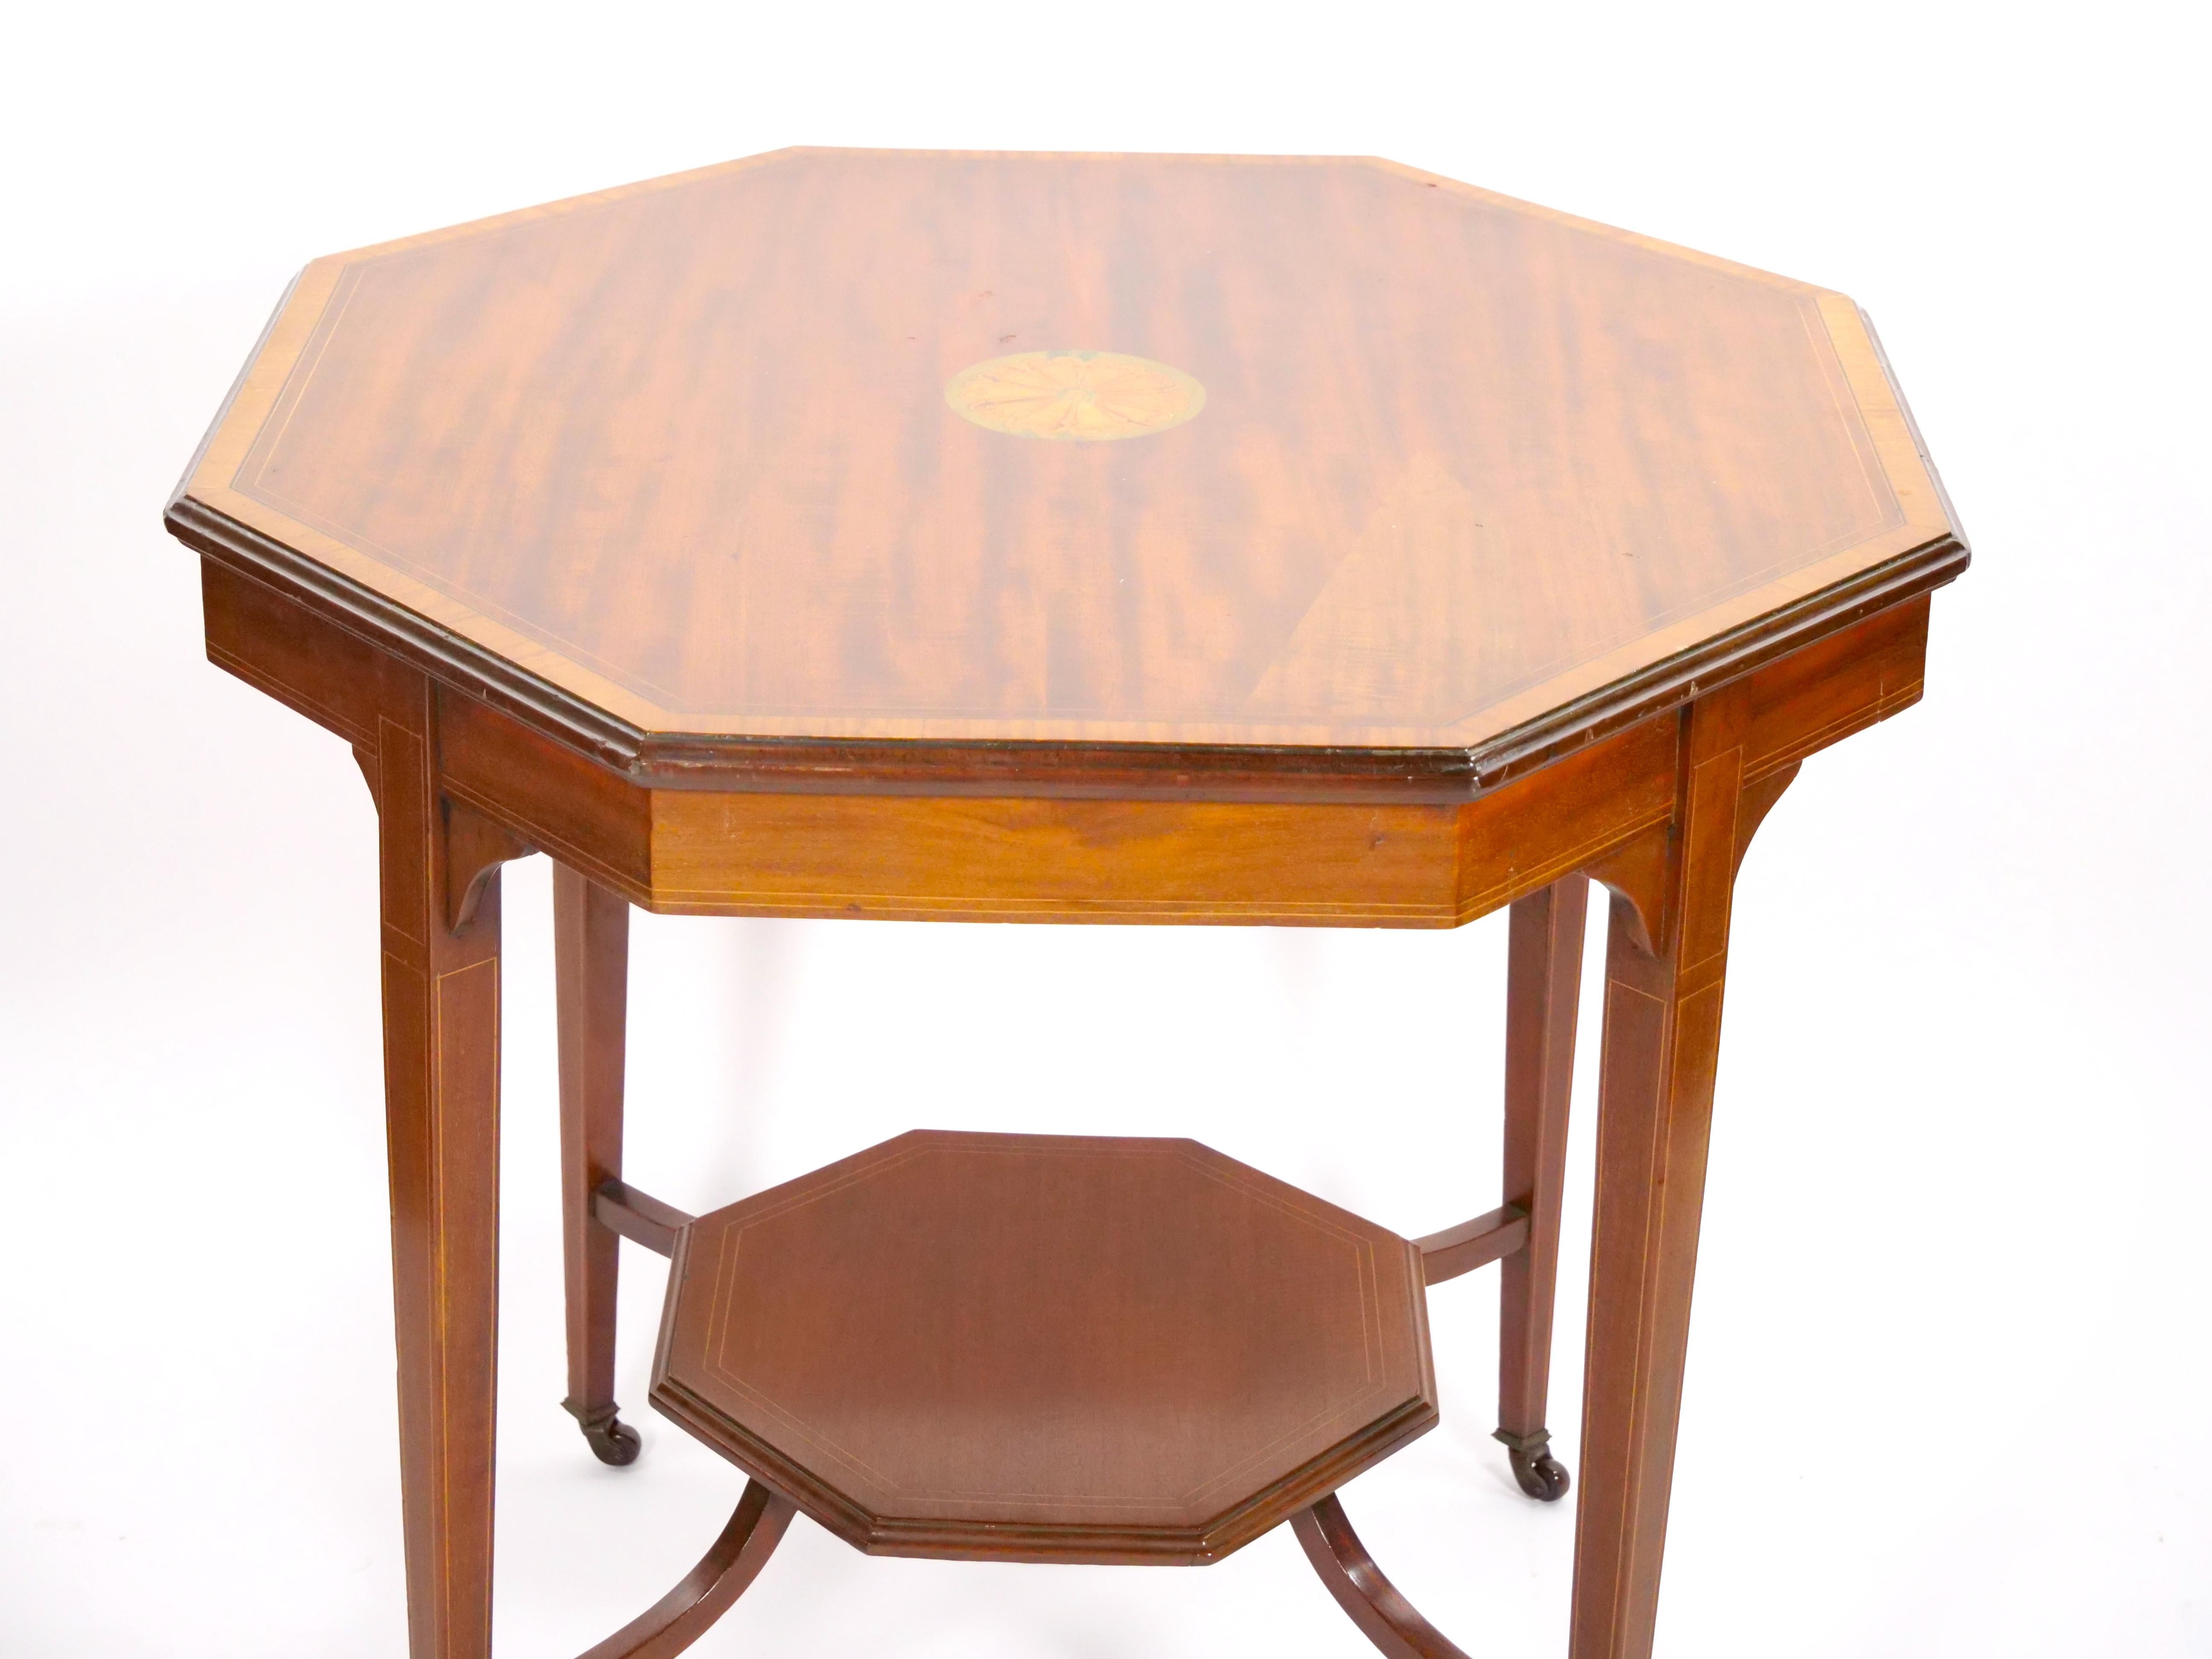 English Burl Mahogany Hexagonal Shape Inlay Decorated Top Center Table For Sale 2